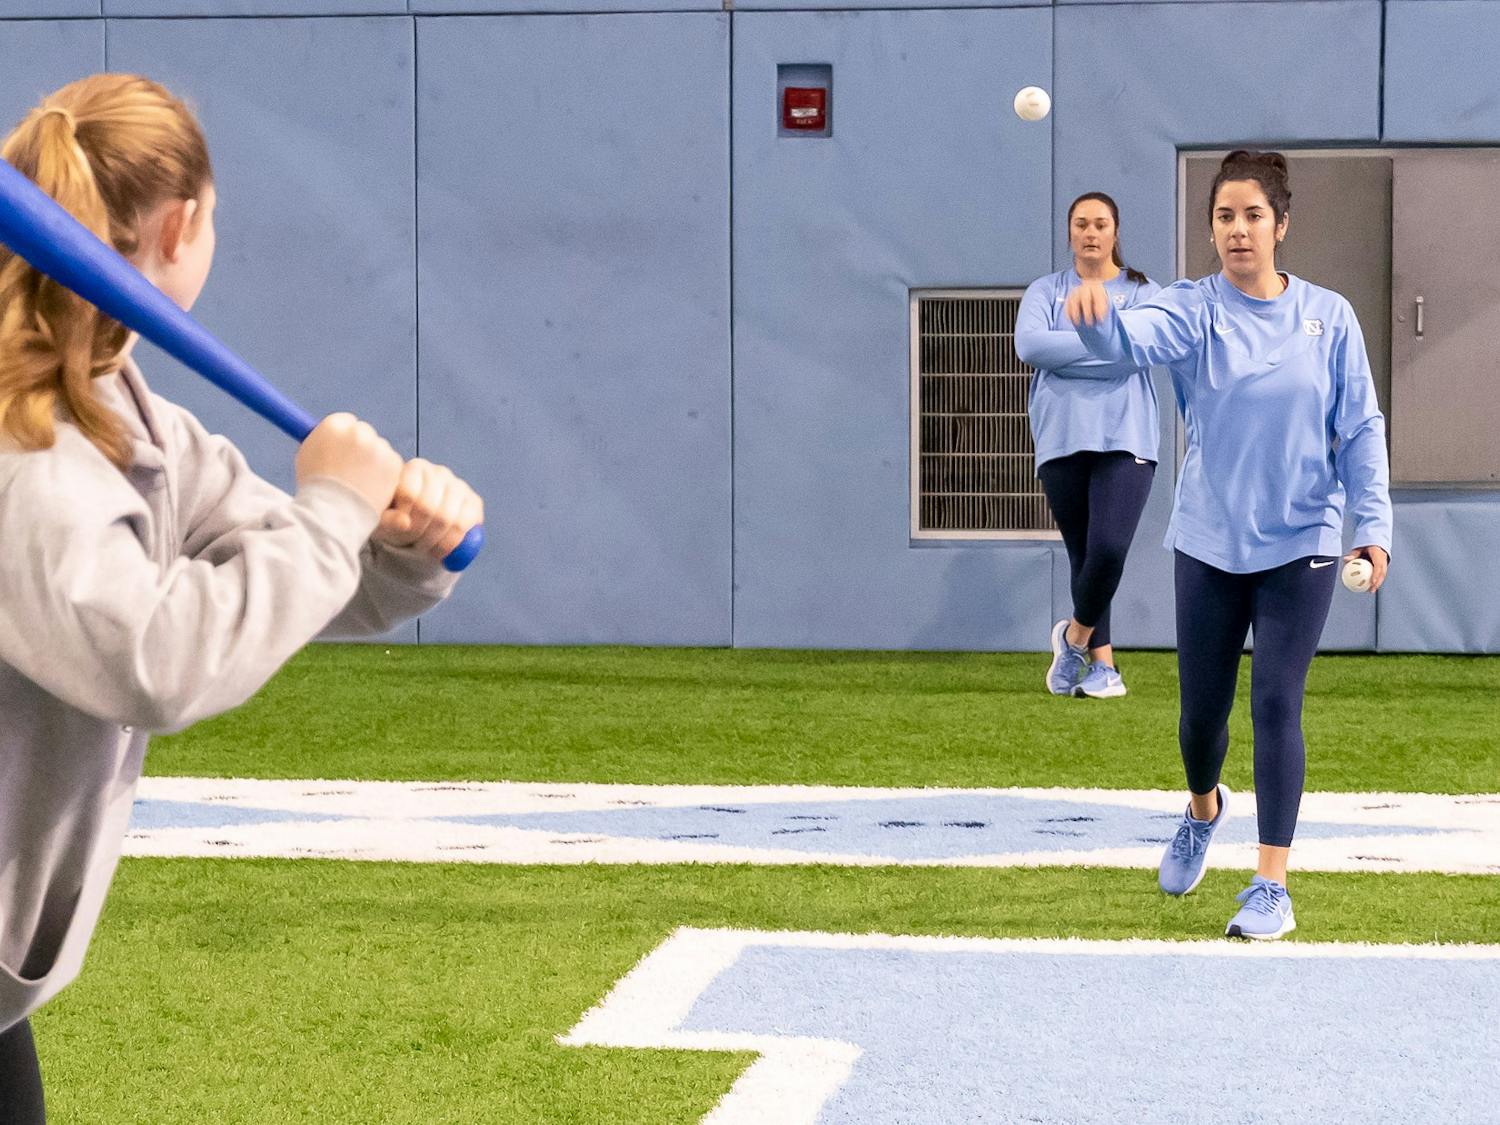 UNC fifth-year softball player Kiersten Licea throws the ball to Maddy Russell at the National Girls & Women in Sports Day event held at the Bill Koman Practice on Sunday, Jan. 22, 2023.